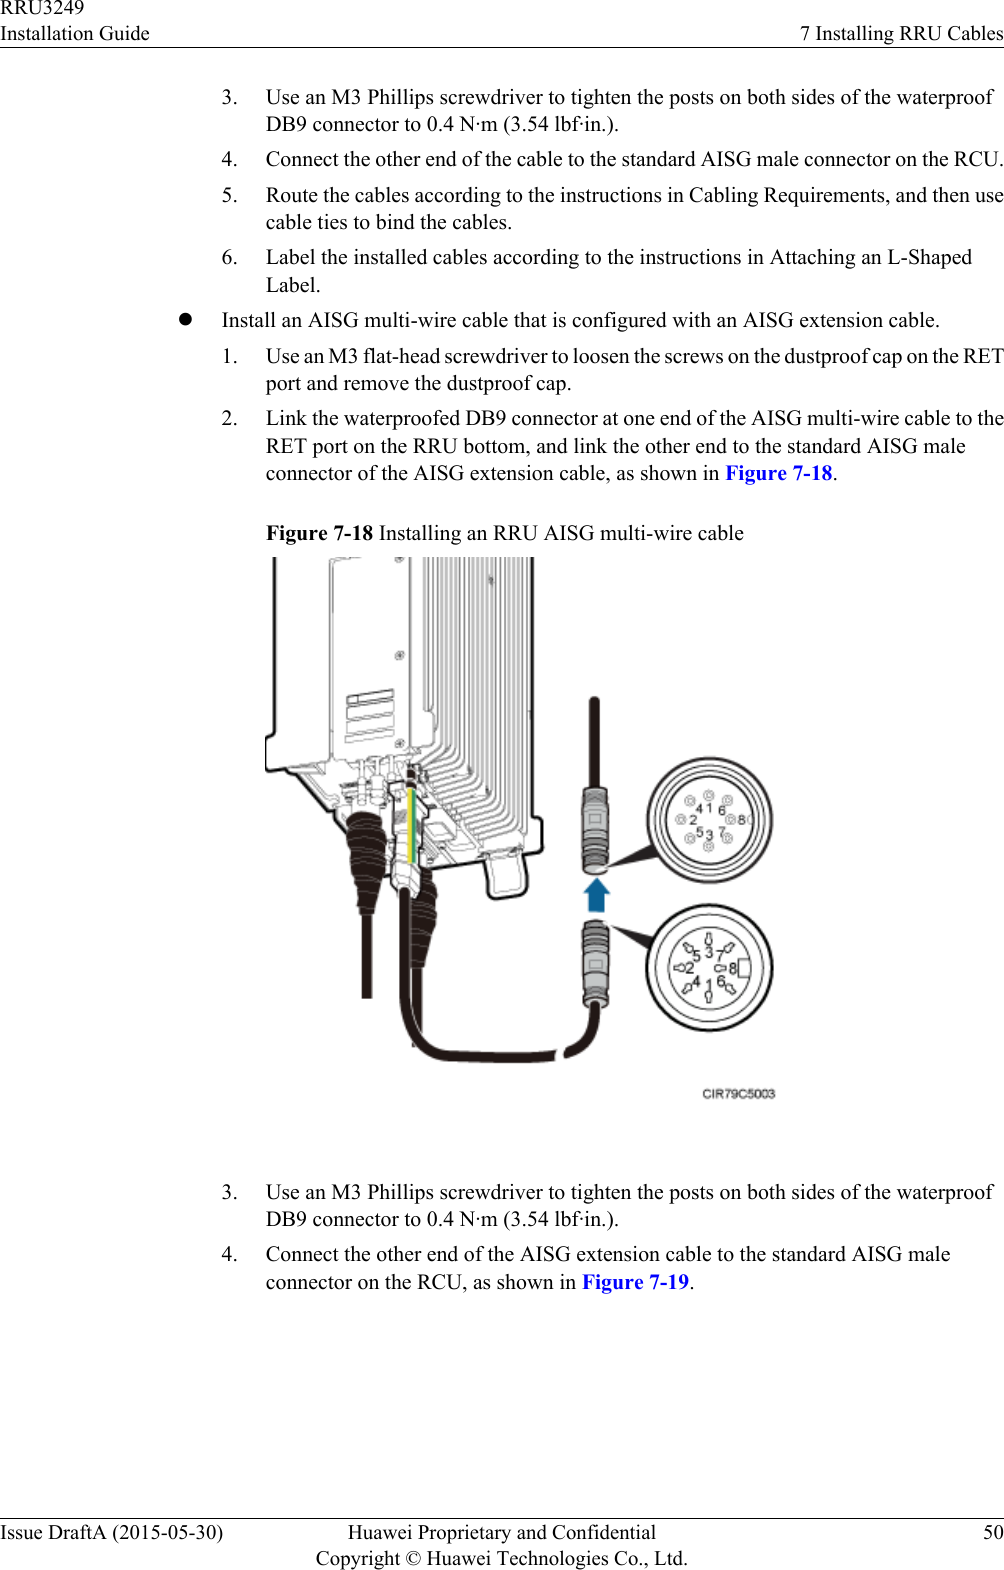 3. Use an M3 Phillips screwdriver to tighten the posts on both sides of the waterproofDB9 connector to 0.4 N·m (3.54 lbf·in.).4. Connect the other end of the cable to the standard AISG male connector on the RCU.5. Route the cables according to the instructions in Cabling Requirements, and then usecable ties to bind the cables.6. Label the installed cables according to the instructions in Attaching an L-ShapedLabel.lInstall an AISG multi-wire cable that is configured with an AISG extension cable.1. Use an M3 flat-head screwdriver to loosen the screws on the dustproof cap on the RETport and remove the dustproof cap.2. Link the waterproofed DB9 connector at one end of the AISG multi-wire cable to theRET port on the RRU bottom, and link the other end to the standard AISG maleconnector of the AISG extension cable, as shown in Figure 7-18.Figure 7-18 Installing an RRU AISG multi-wire cable 3. Use an M3 Phillips screwdriver to tighten the posts on both sides of the waterproofDB9 connector to 0.4 N·m (3.54 lbf·in.).4. Connect the other end of the AISG extension cable to the standard AISG maleconnector on the RCU, as shown in Figure 7-19.RRU3249Installation Guide 7 Installing RRU CablesIssue DraftA (2015-05-30) Huawei Proprietary and ConfidentialCopyright © Huawei Technologies Co., Ltd.50